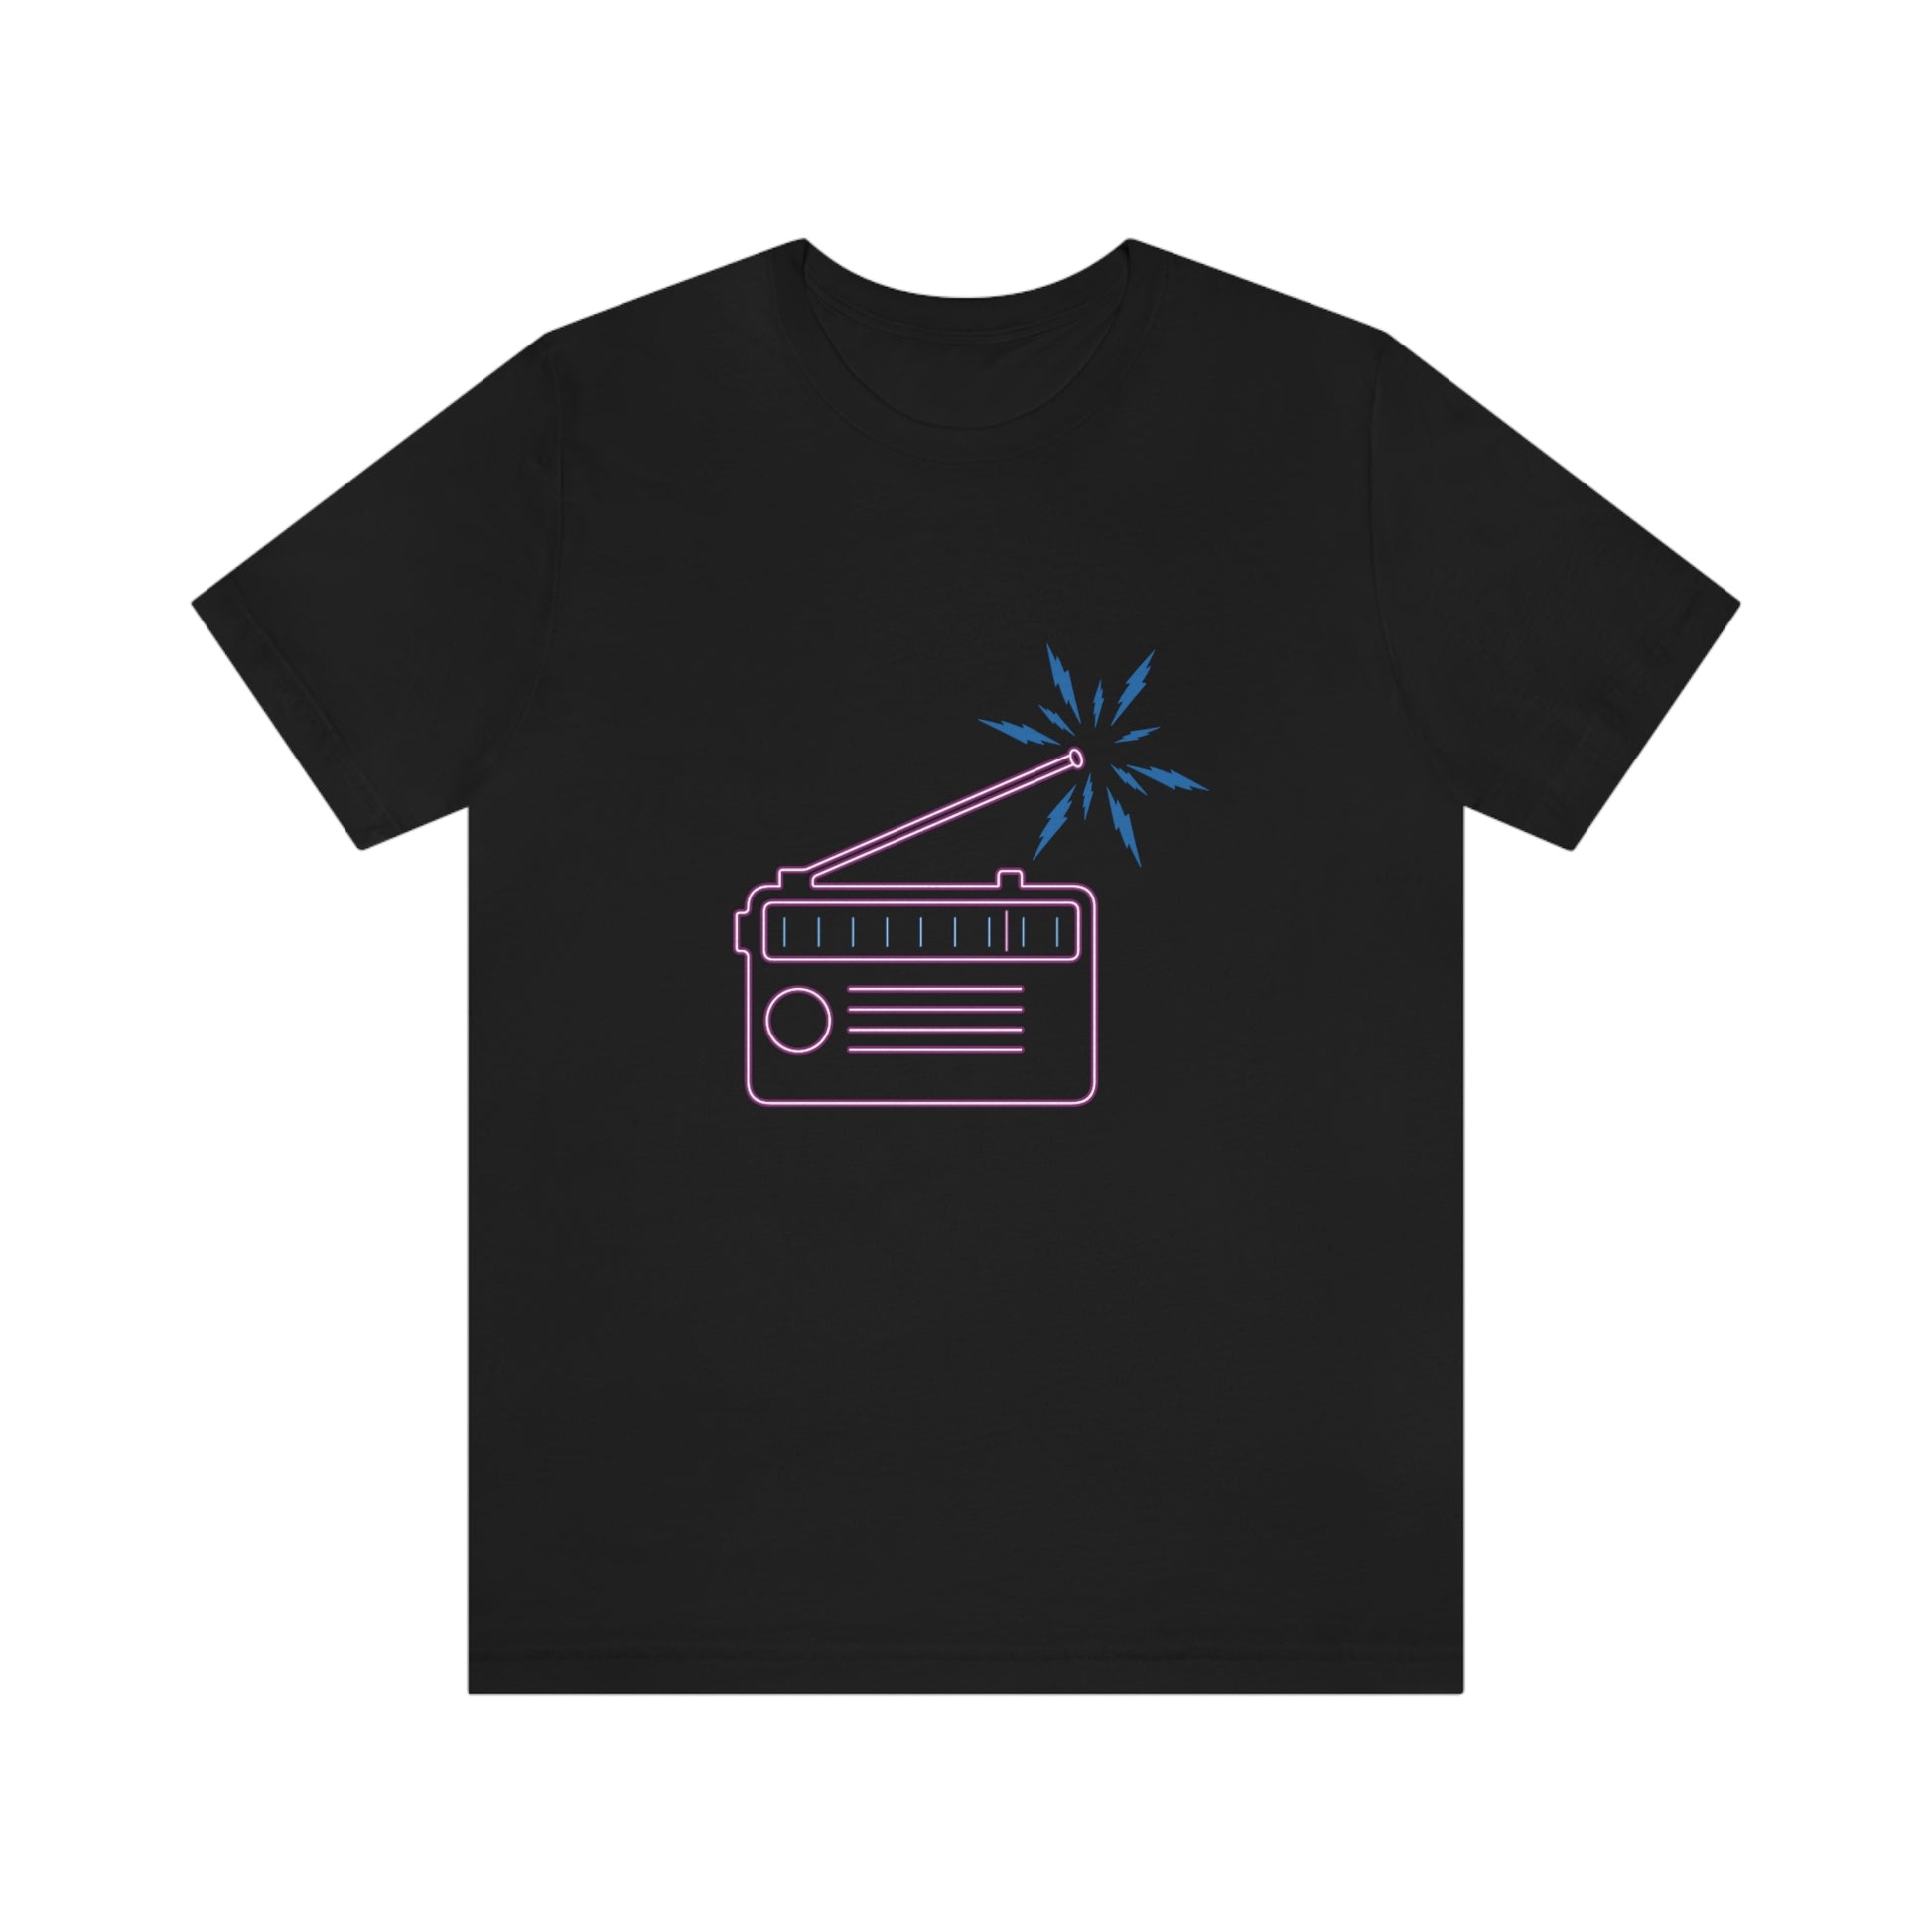 Black T-Shirt featuring a multi-coloured neon radio design, radiating a vibrant energy. Taken from the TEQNEON Radioactive and Retro Classics collections